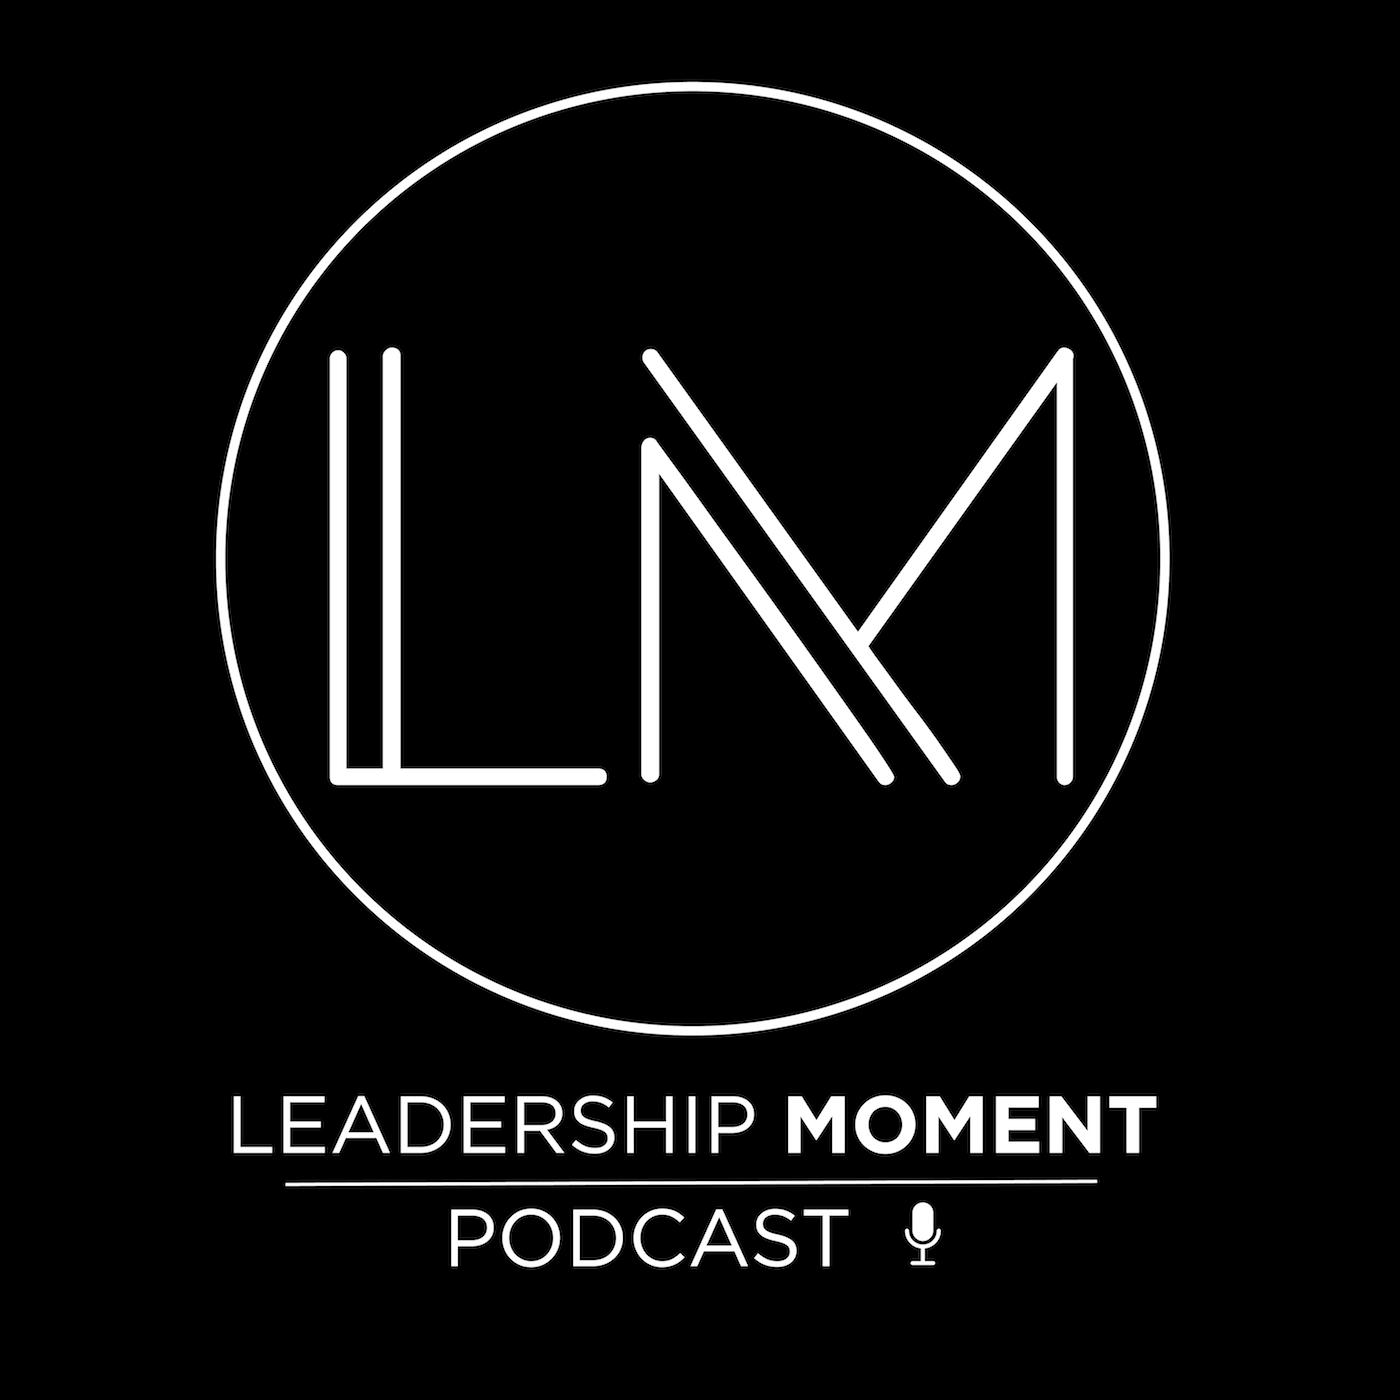 Leadership Development and Growth with Michael Pollard - LM0211